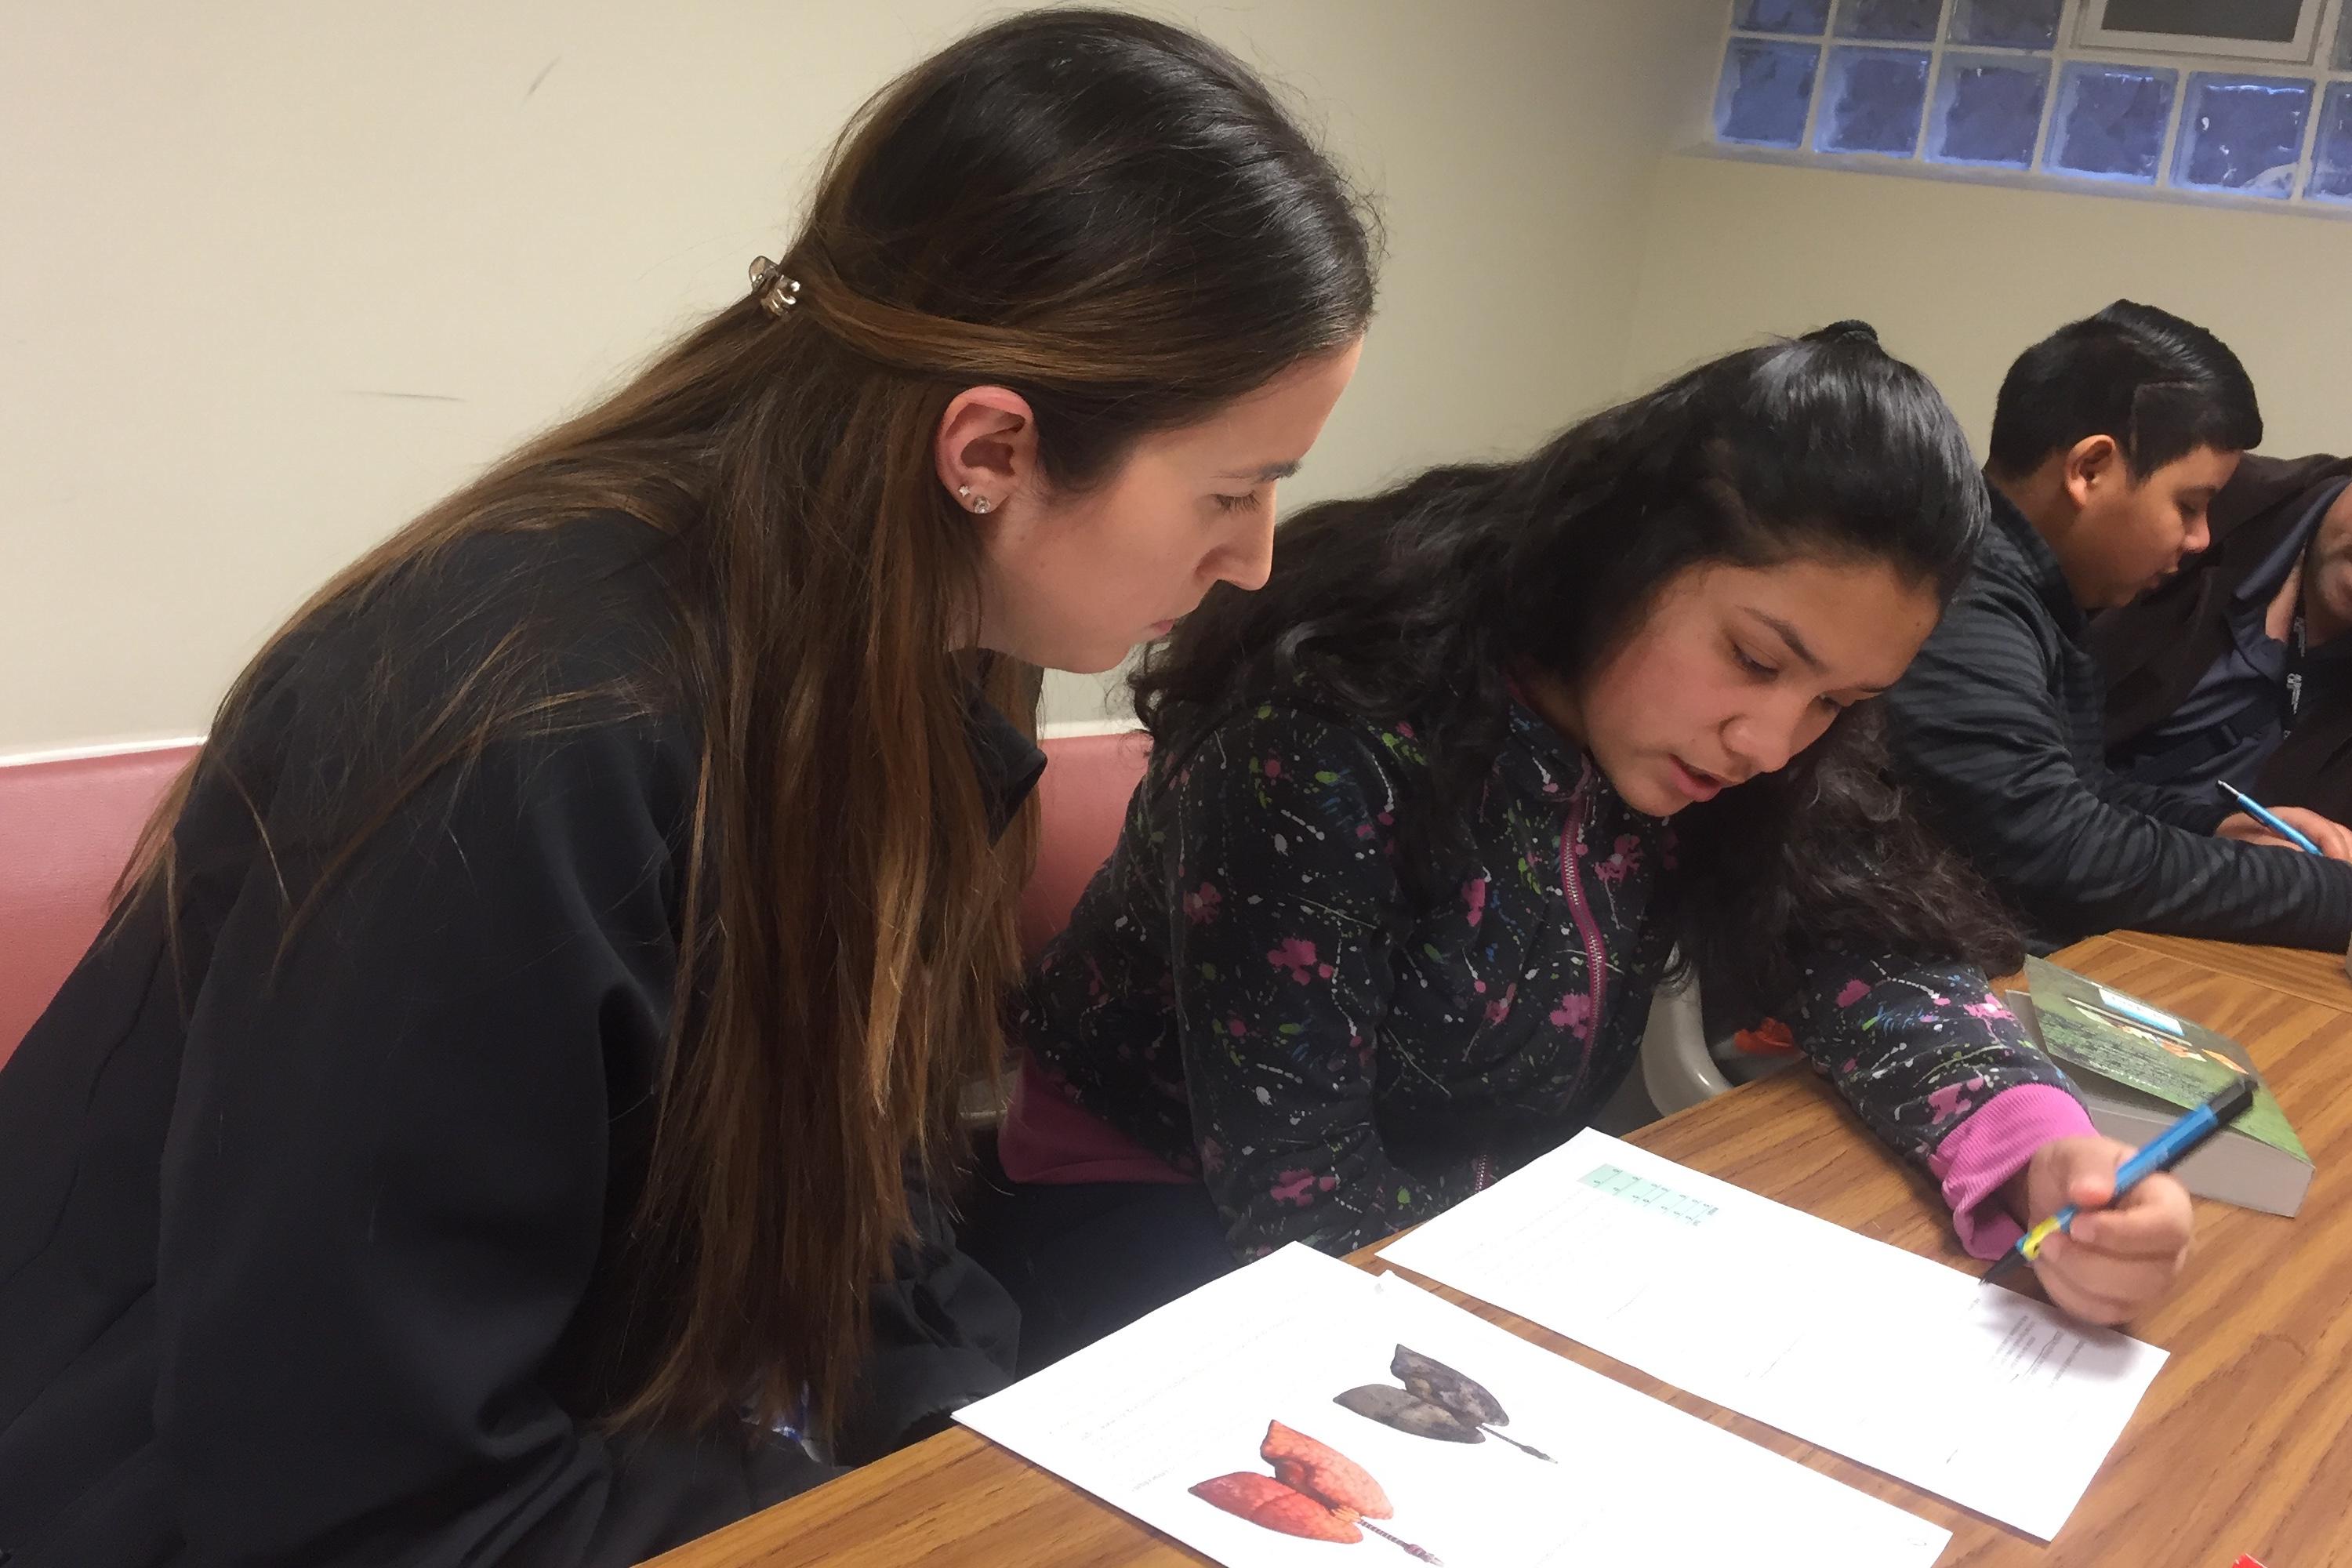 OUWB student helps high school student with her homework.